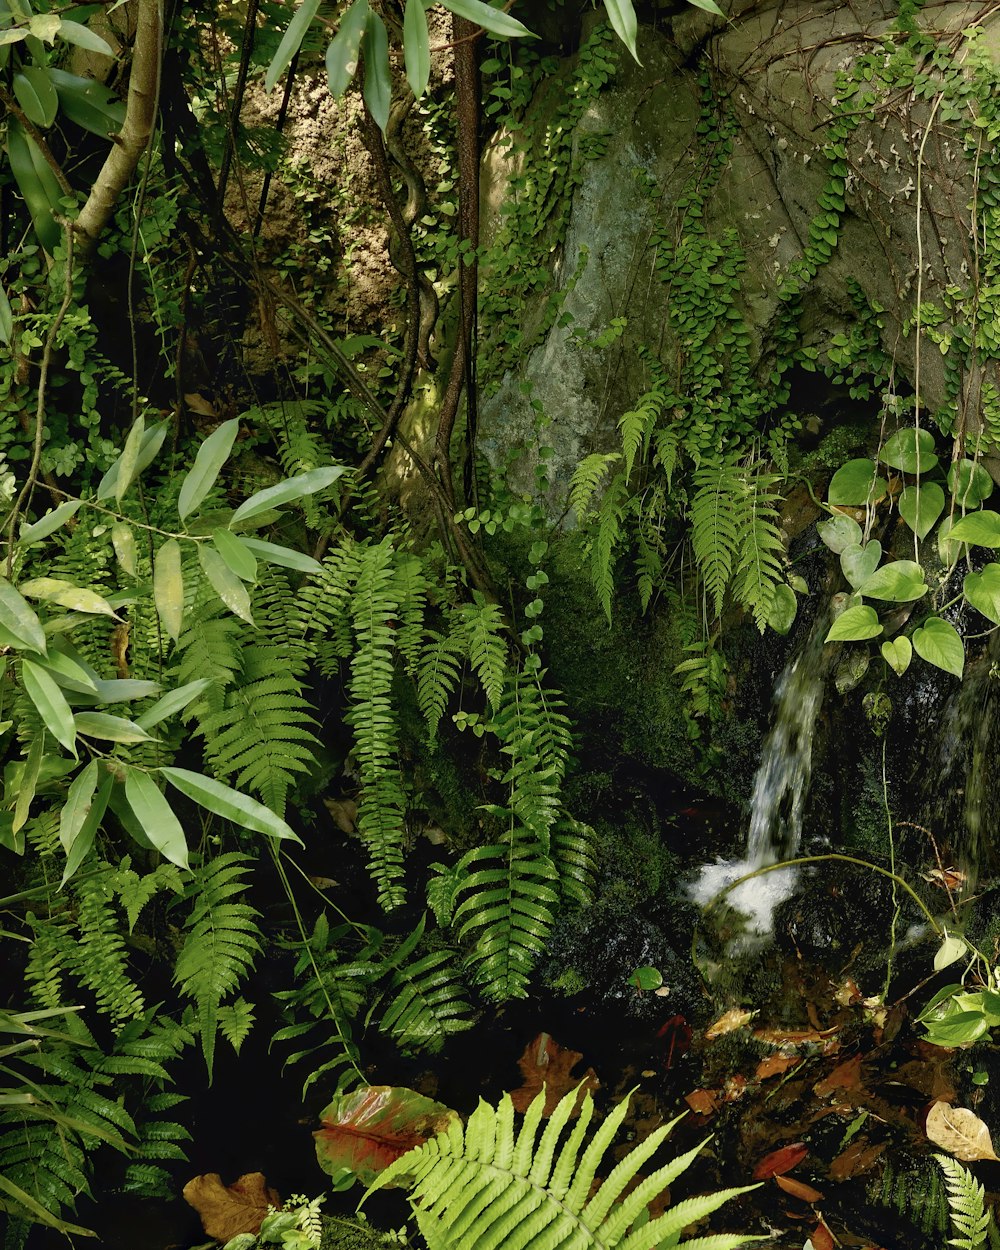 a small waterfall in the middle of a lush green forest